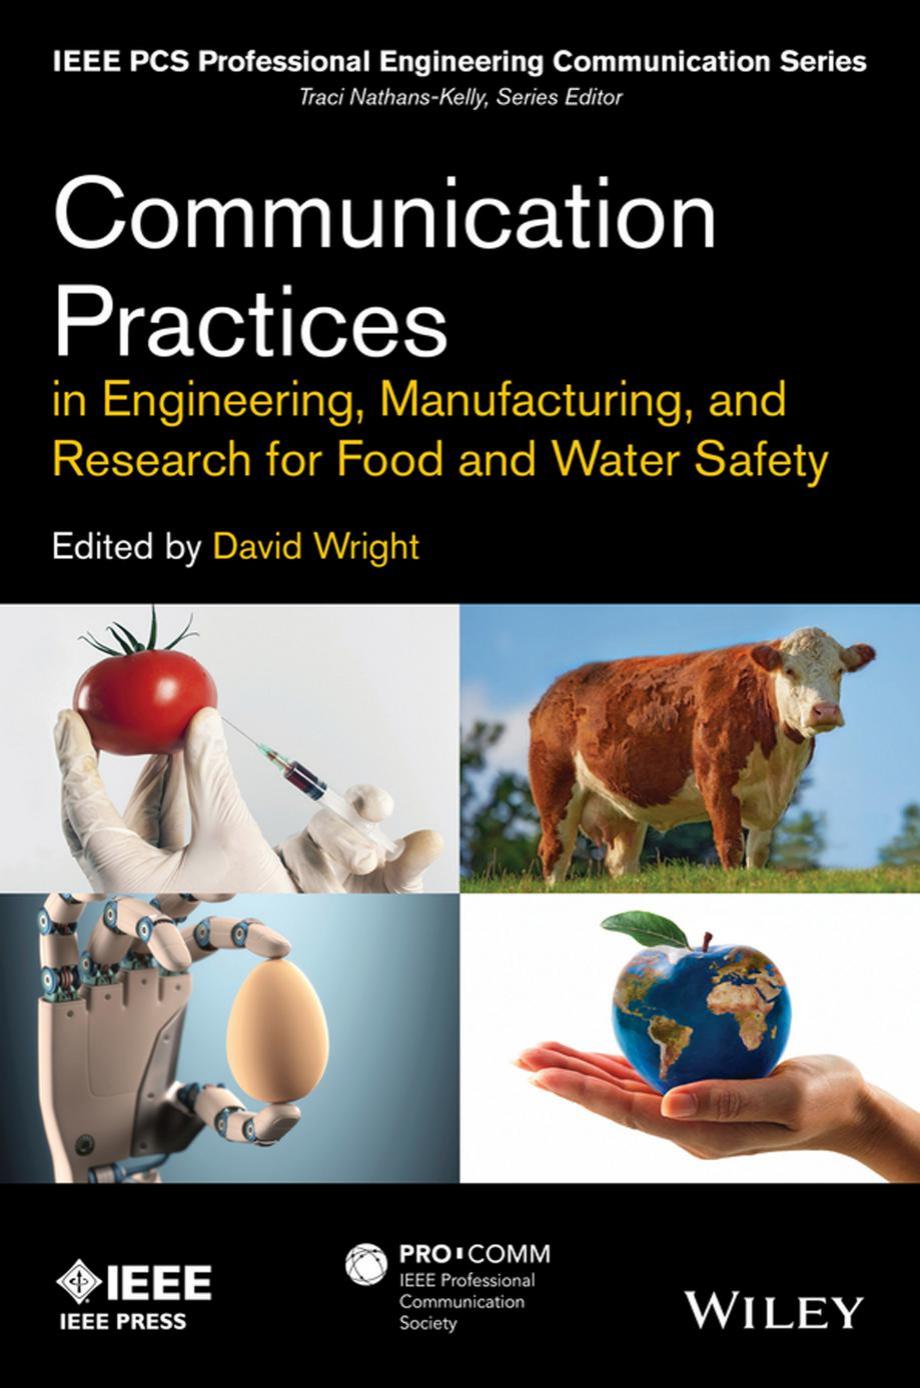 Communication Practices in Engineering, Manufacturing, and Research for Food, Drug, and Water Safety